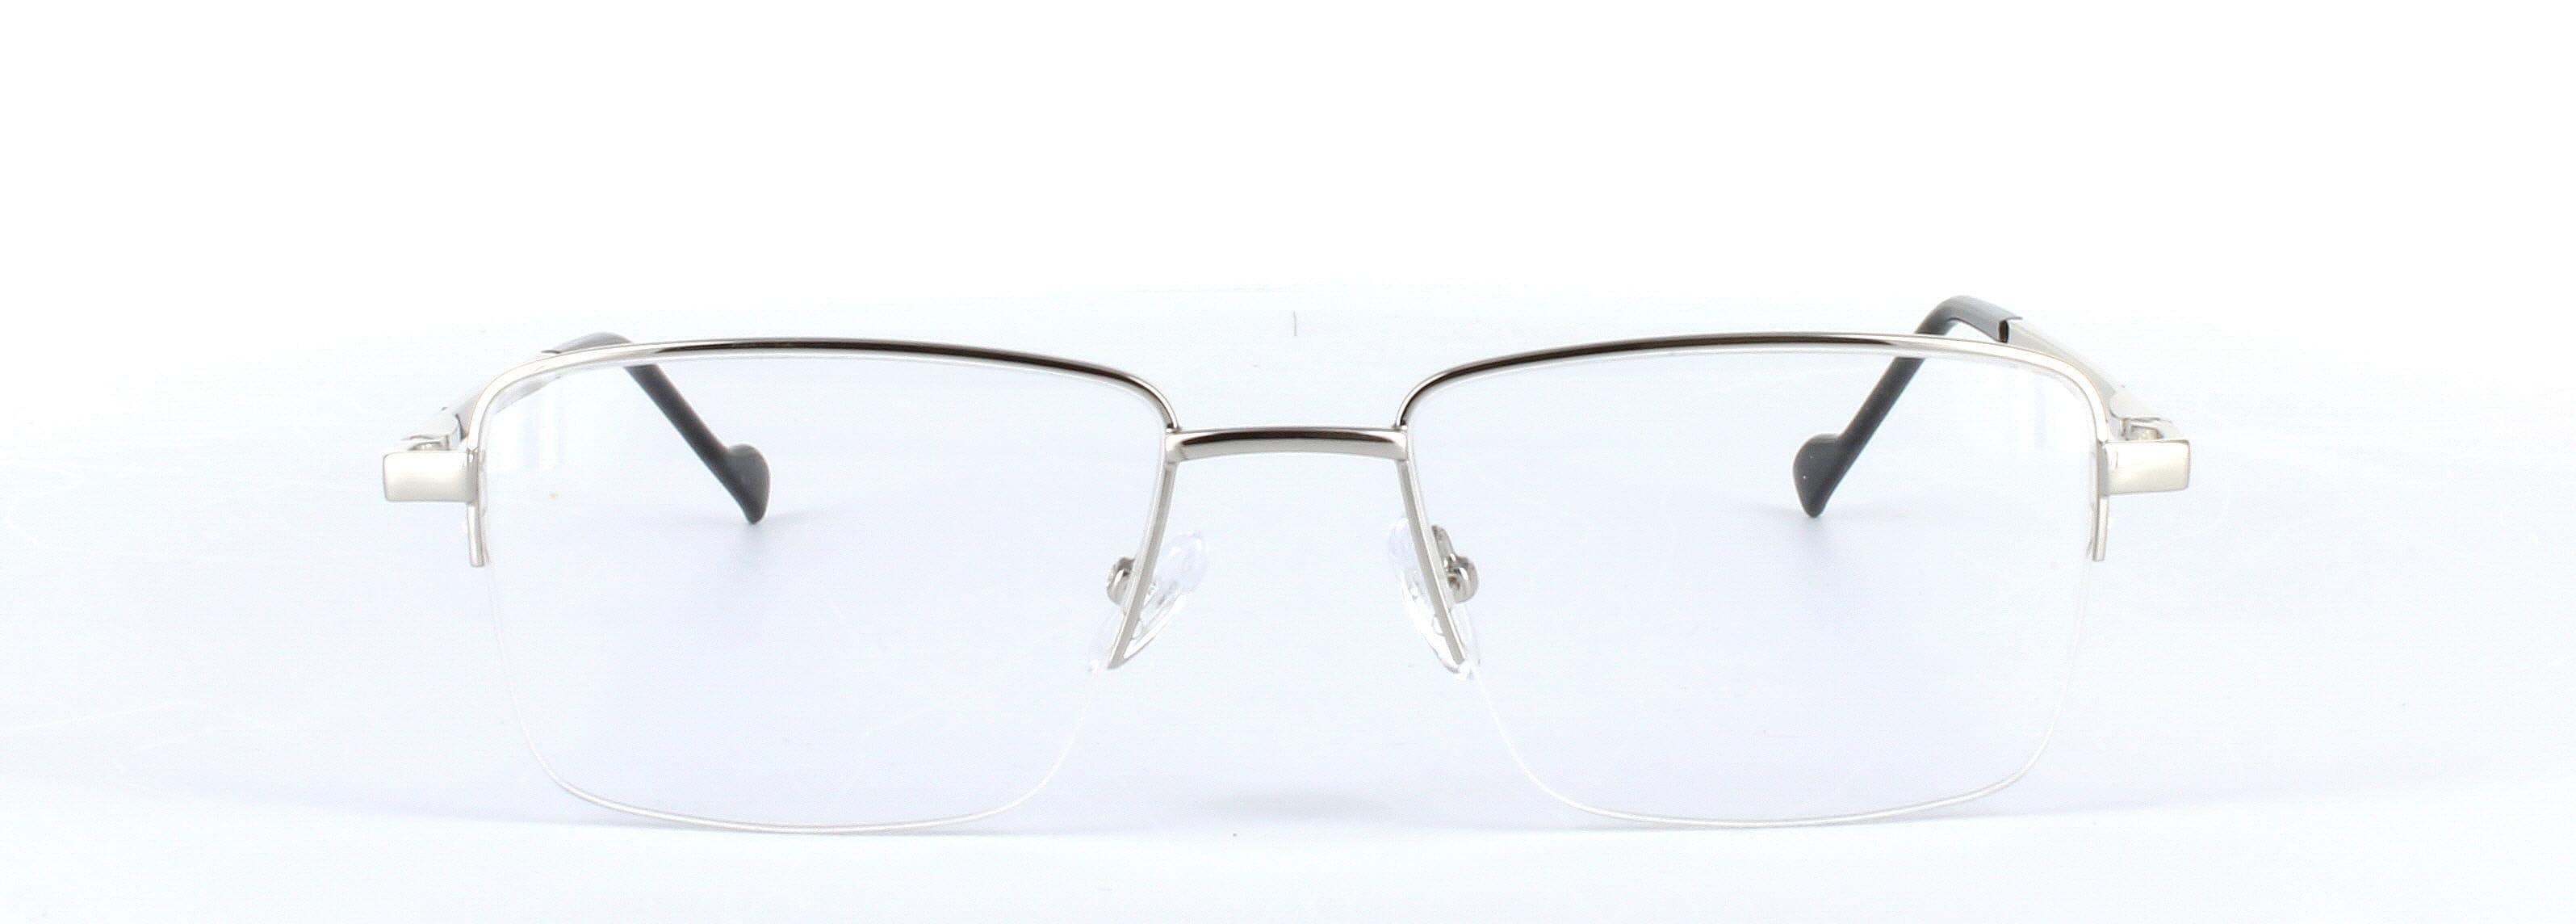 Miguel Silver Semi Rimless Metal Glasses - Image View 5